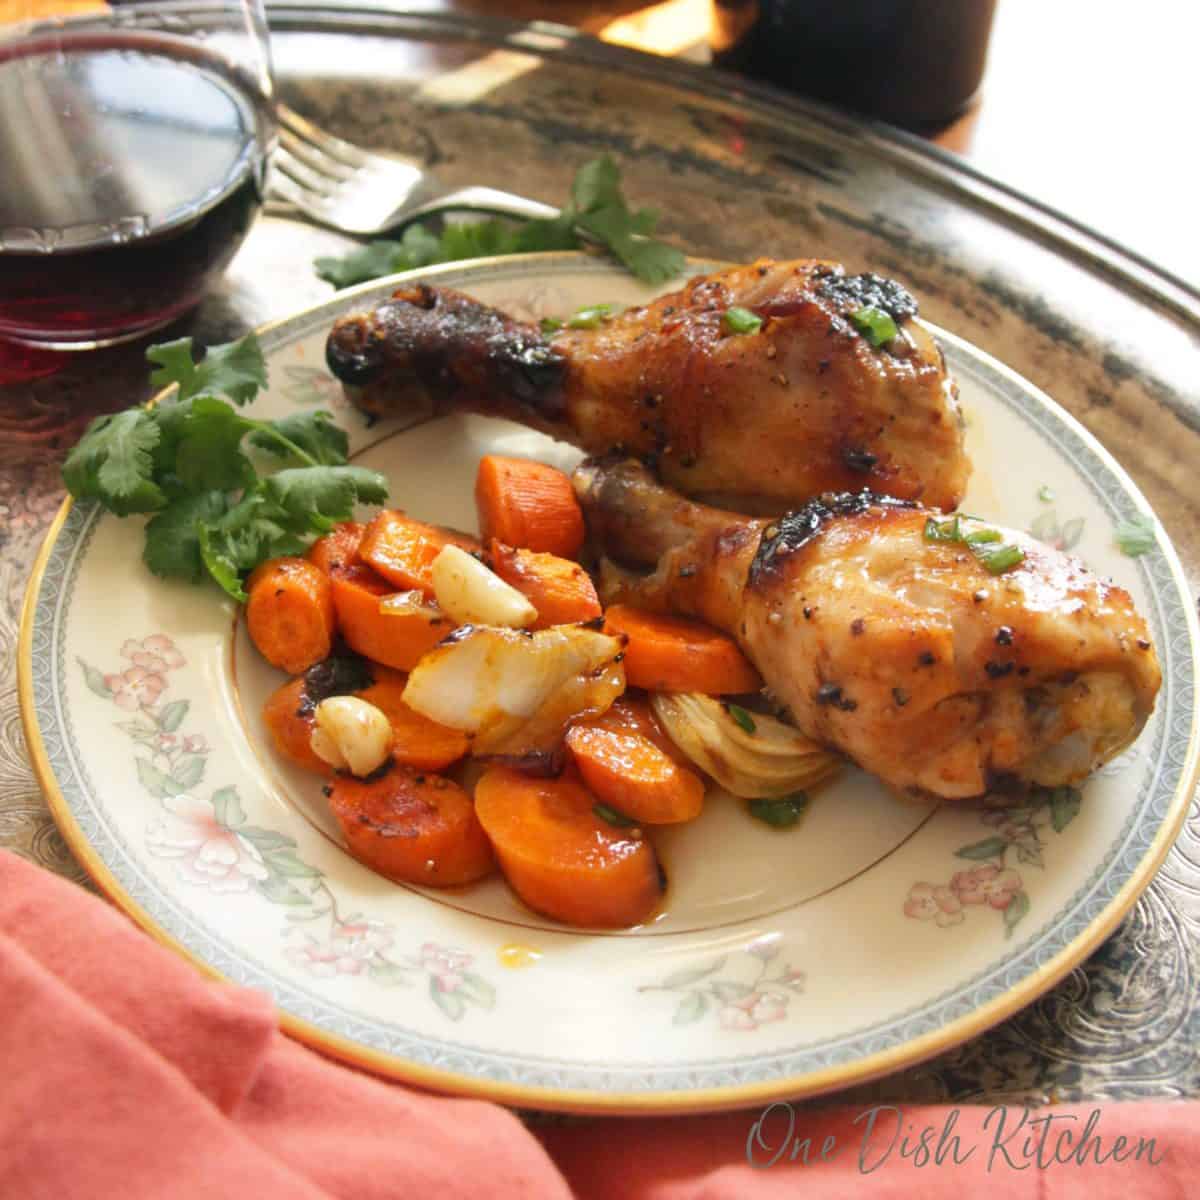 Two bbq chicken drumsticks on a plate with chopped carrots and garlic next to a glass of red wine all on a metal tray